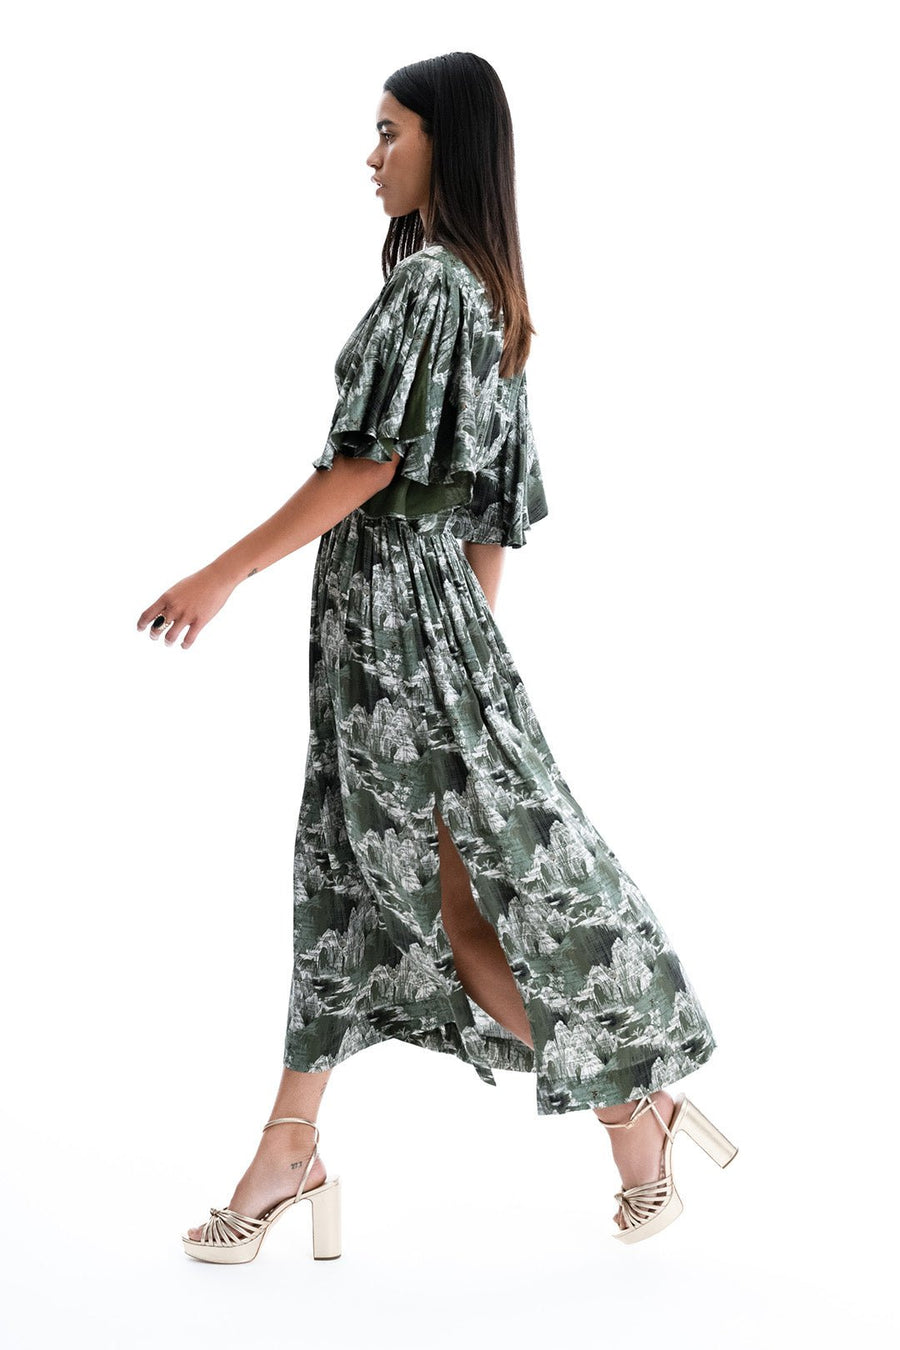 OASIS MIDI DRESS, MEADOW - Burning Torch Online Boutique